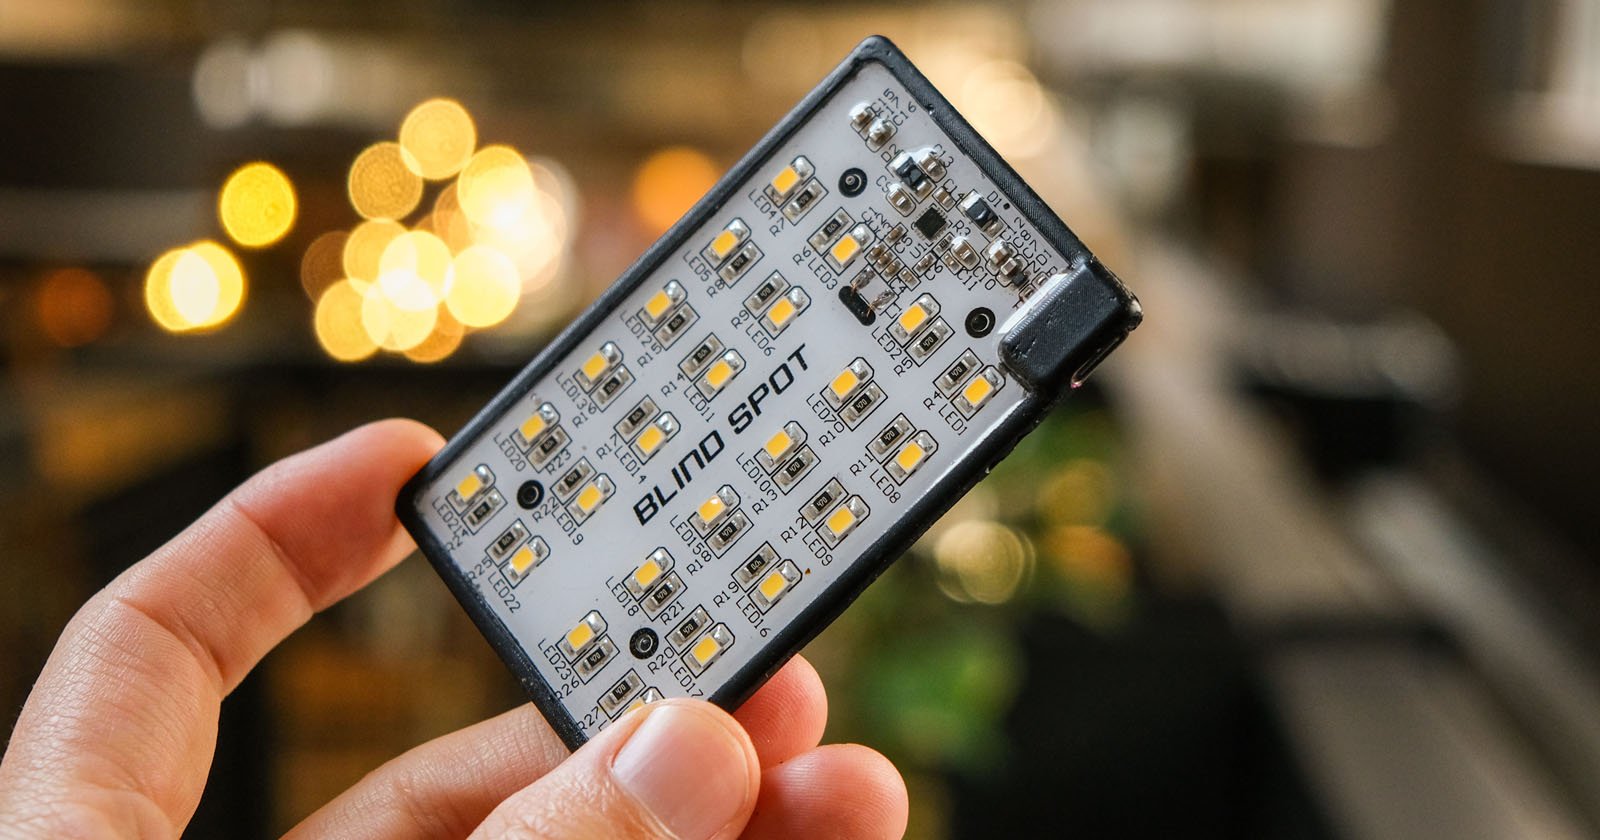  lumicard compact light magnetically attaches your phone 